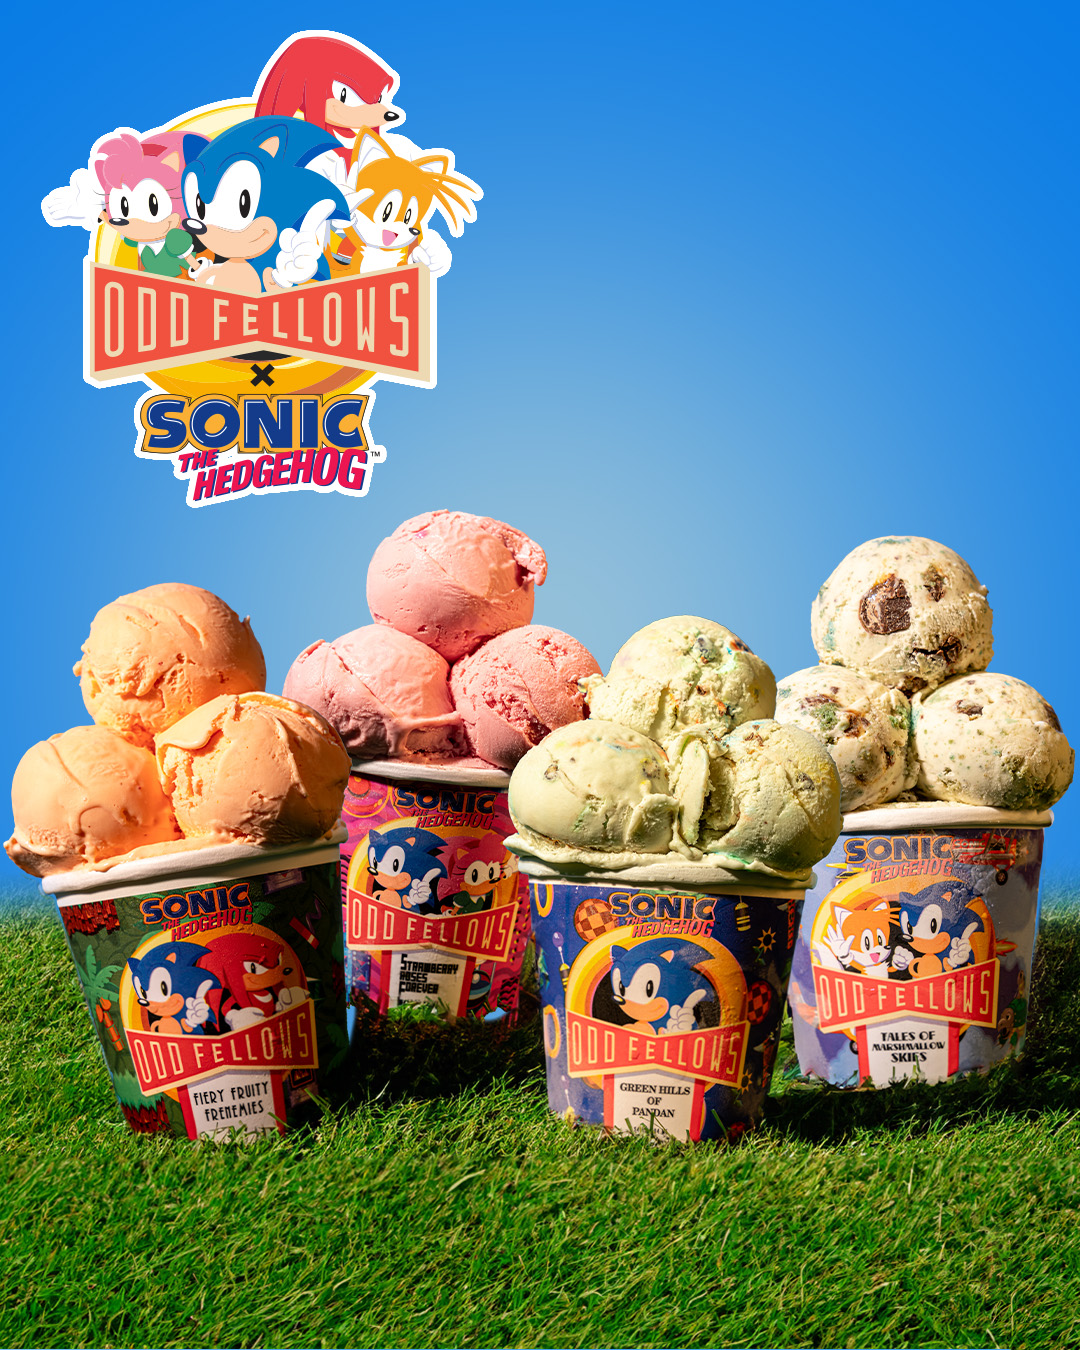 Sega Announces New Sonic the Hedgehog Ice Cream Collaboration Releasing Tomorrow Featuring 4 Flavors